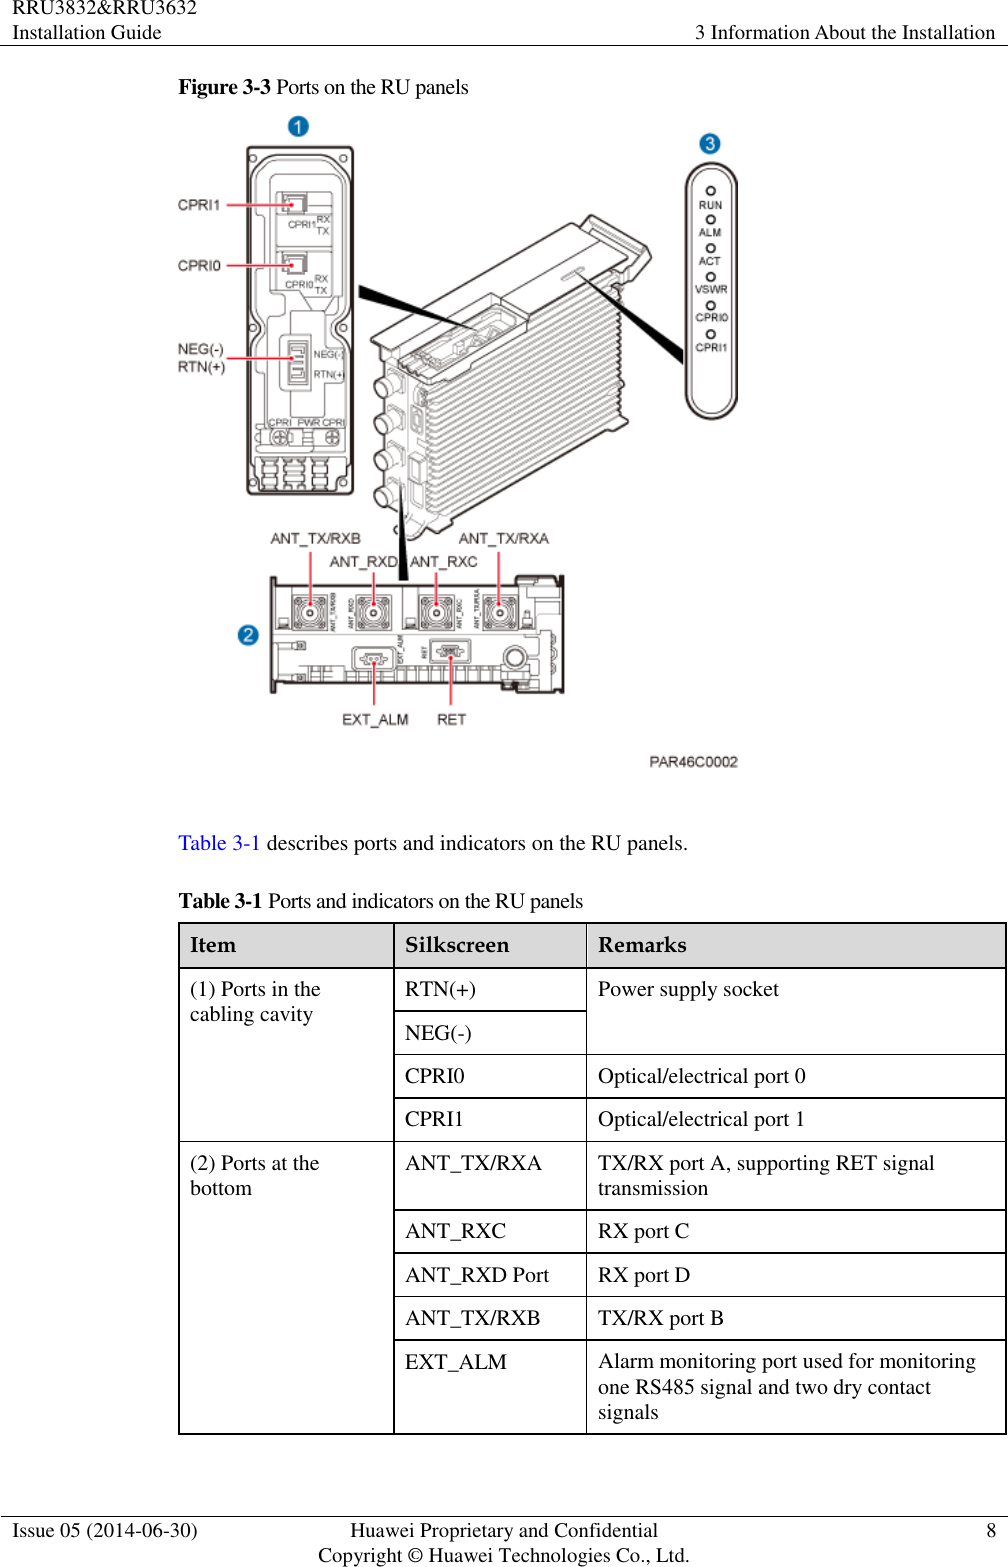 RRU3832&amp;RRU3632 Installation Guide 3 Information About the Installation  Issue 05 (2014-06-30) Huawei Proprietary and Confidential                                     Copyright © Huawei Technologies Co., Ltd. 8  Figure 3-3 Ports on the RU panels   Table 3-1 describes ports and indicators on the RU panels. Table 3-1 Ports and indicators on the RU panels Item Silkscreen Remarks (1) Ports in the cabling cavity RTN(+) Power supply socket NEG(-) CPRI0 Optical/electrical port 0 CPRI1 Optical/electrical port 1 (2) Ports at the bottom ANT_TX/RXA TX/RX port A, supporting RET signal transmission ANT_RXC RX port C ANT_RXD Port RX port D ANT_TX/RXB TX/RX port B EXT_ALM Alarm monitoring port used for monitoring one RS485 signal and two dry contact signals 